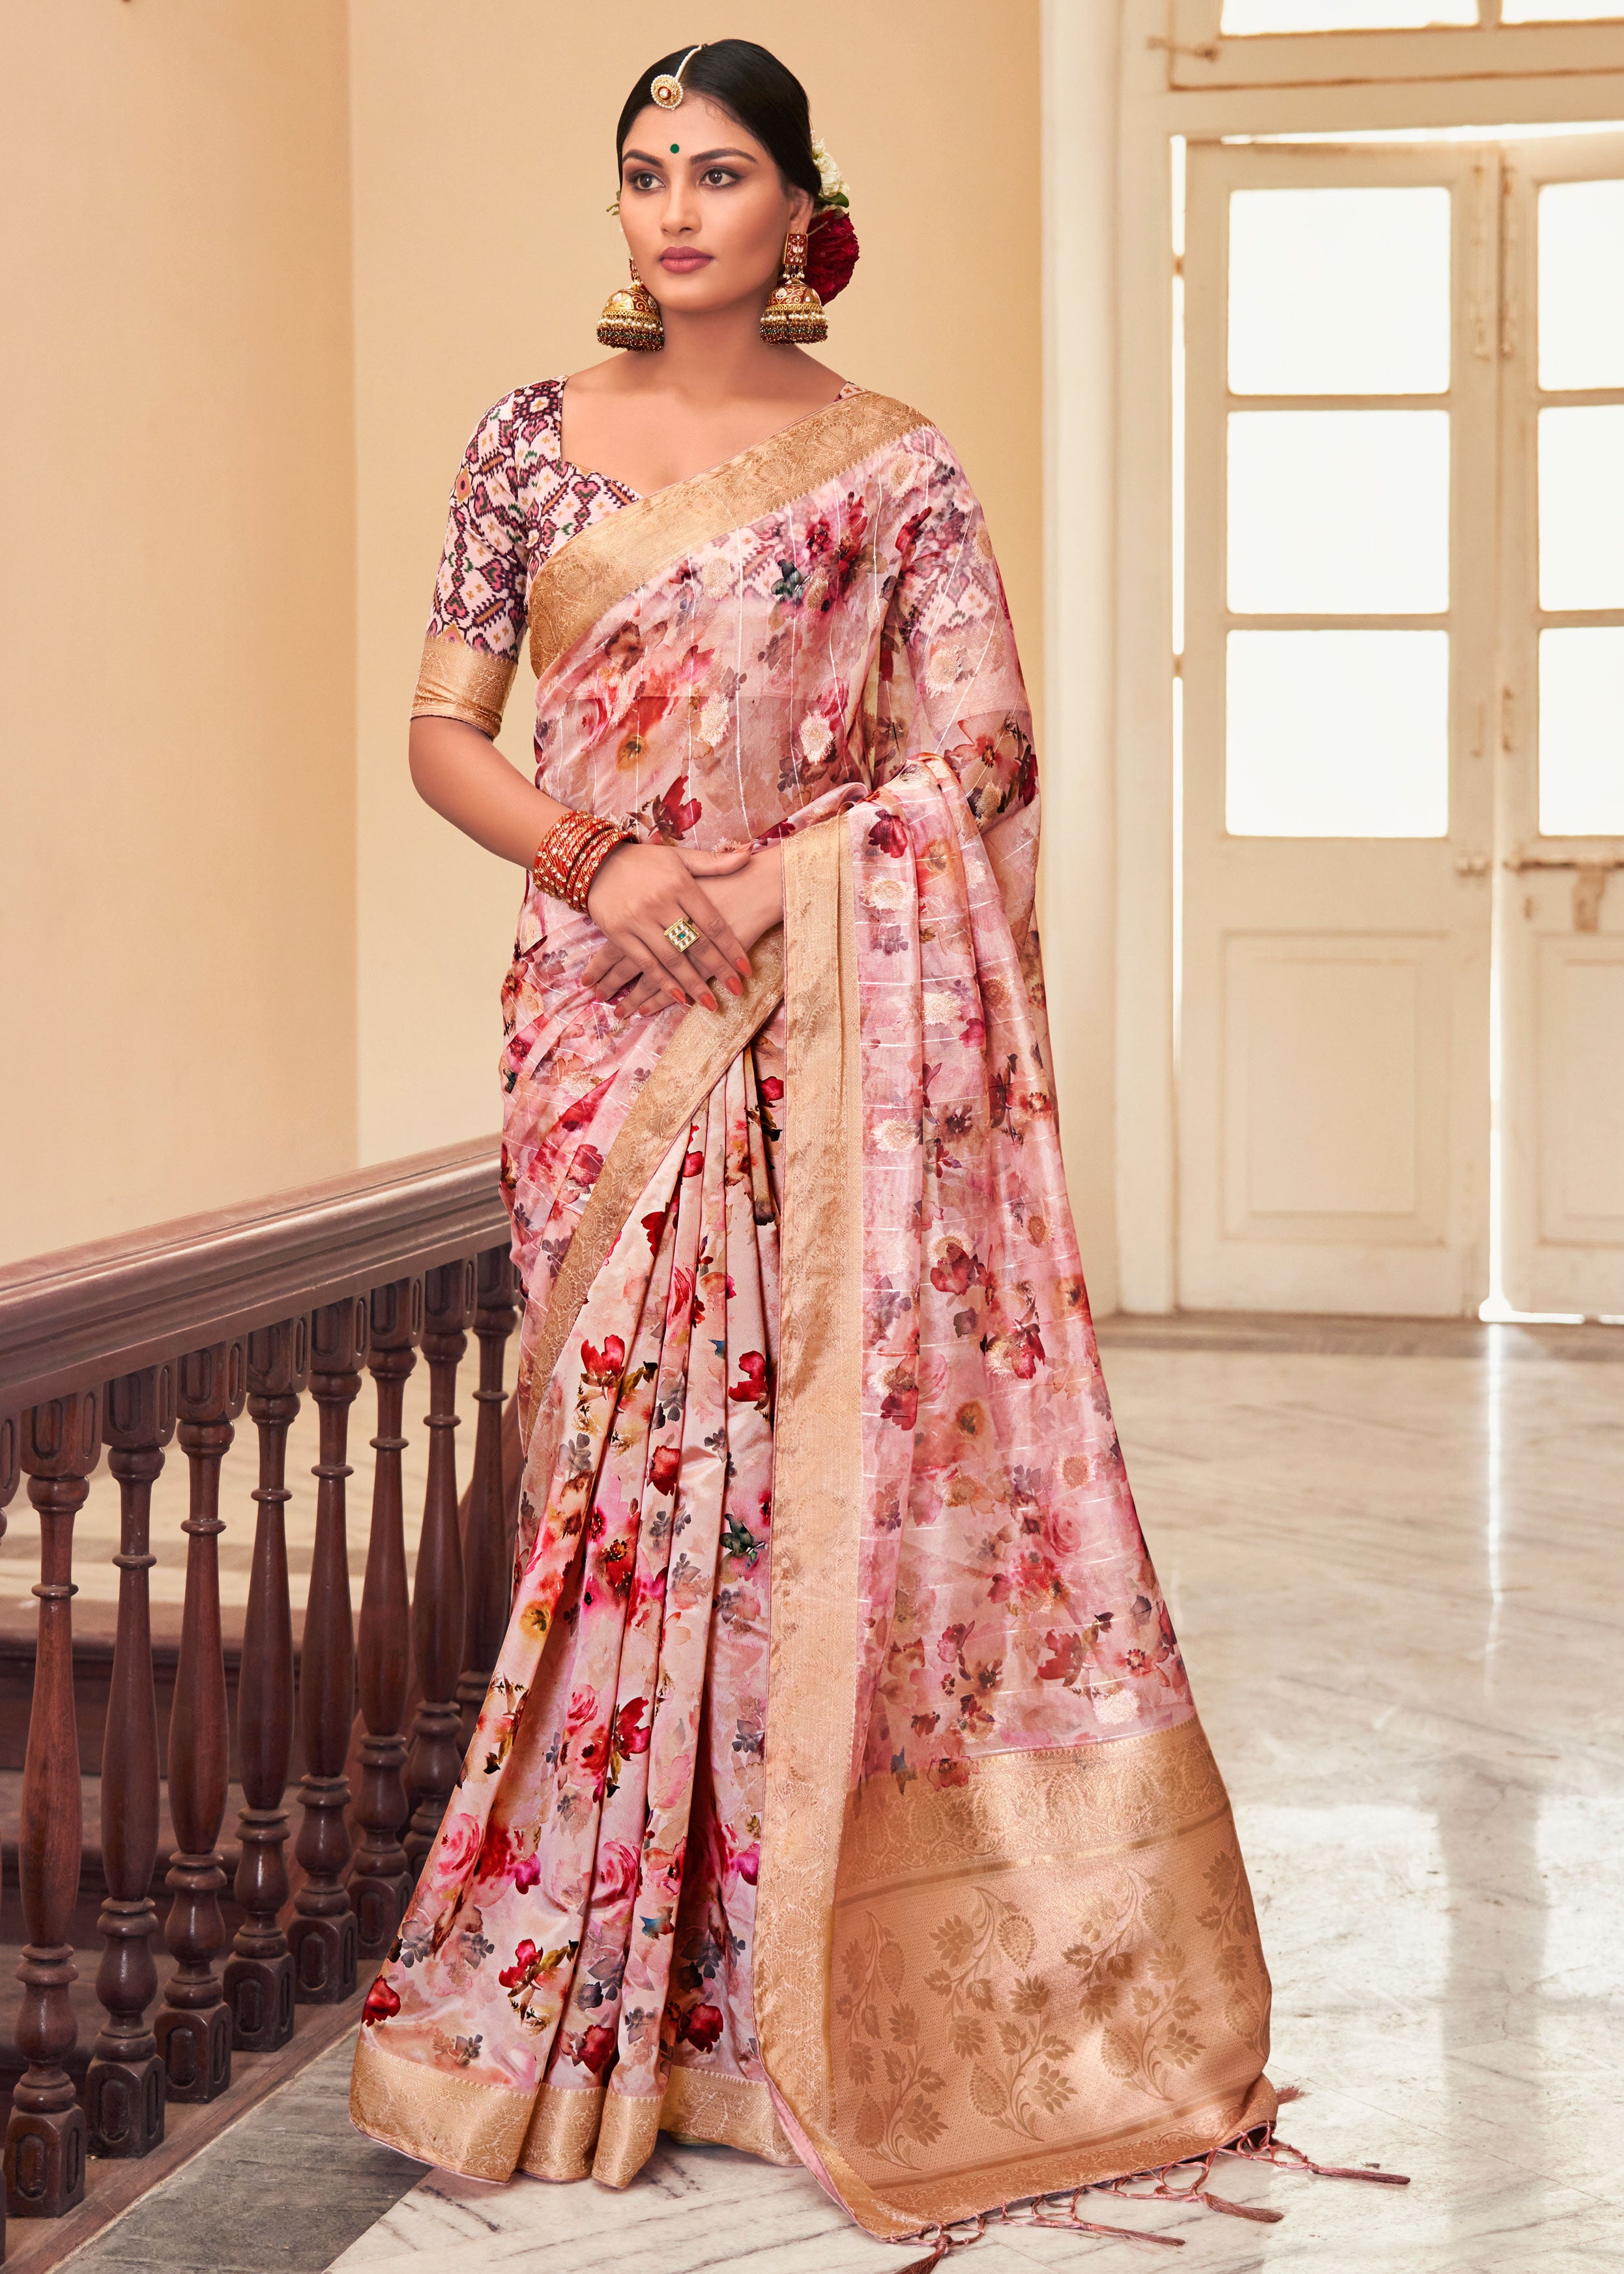 DIGITAL FLORAL PRINTED SEQUINS WEAVING ORGANZA BLEND PINK PURPLE SAREE WITH PATOLA BLOUSE